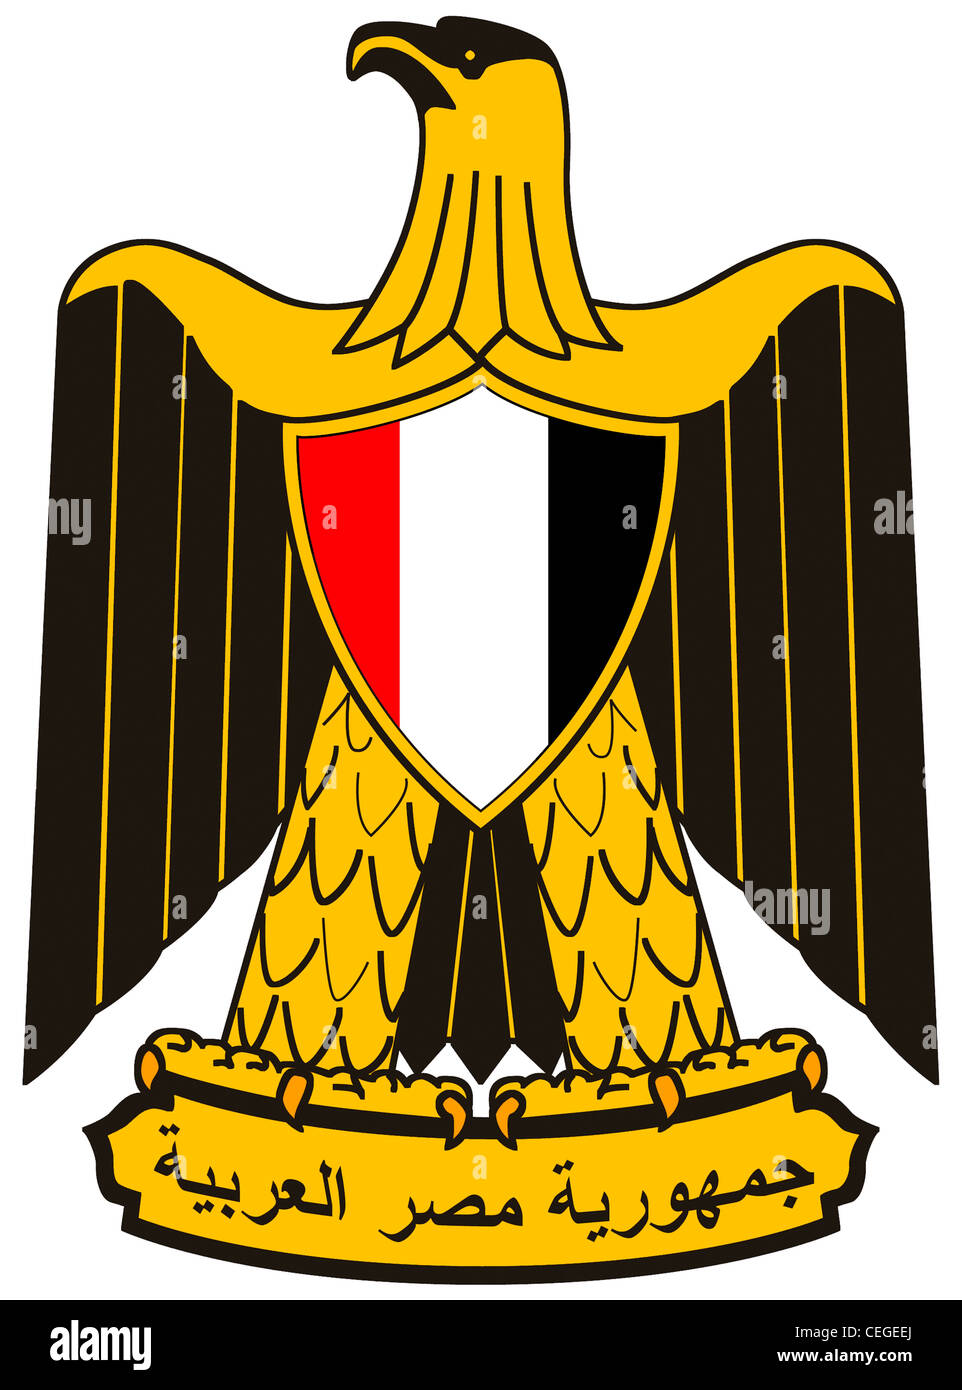 National coat of arms of the Arabian Republic of Egypt. Stock Photo